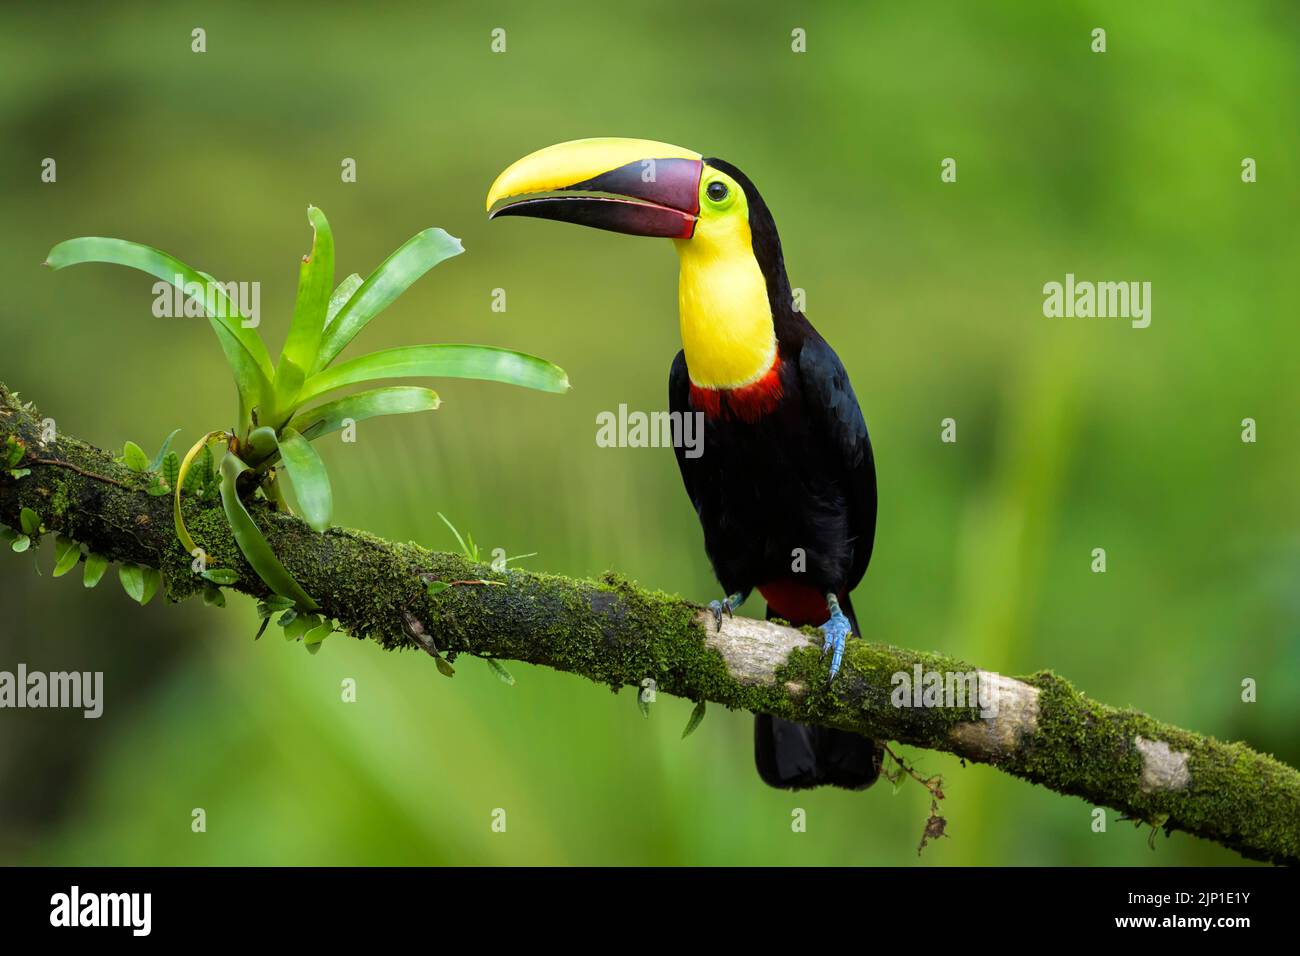 Black-mandibled toucan (Ramphastos ambiguus) perched on a branch with moss and bromeliad, Costa Rica. Stock Photo